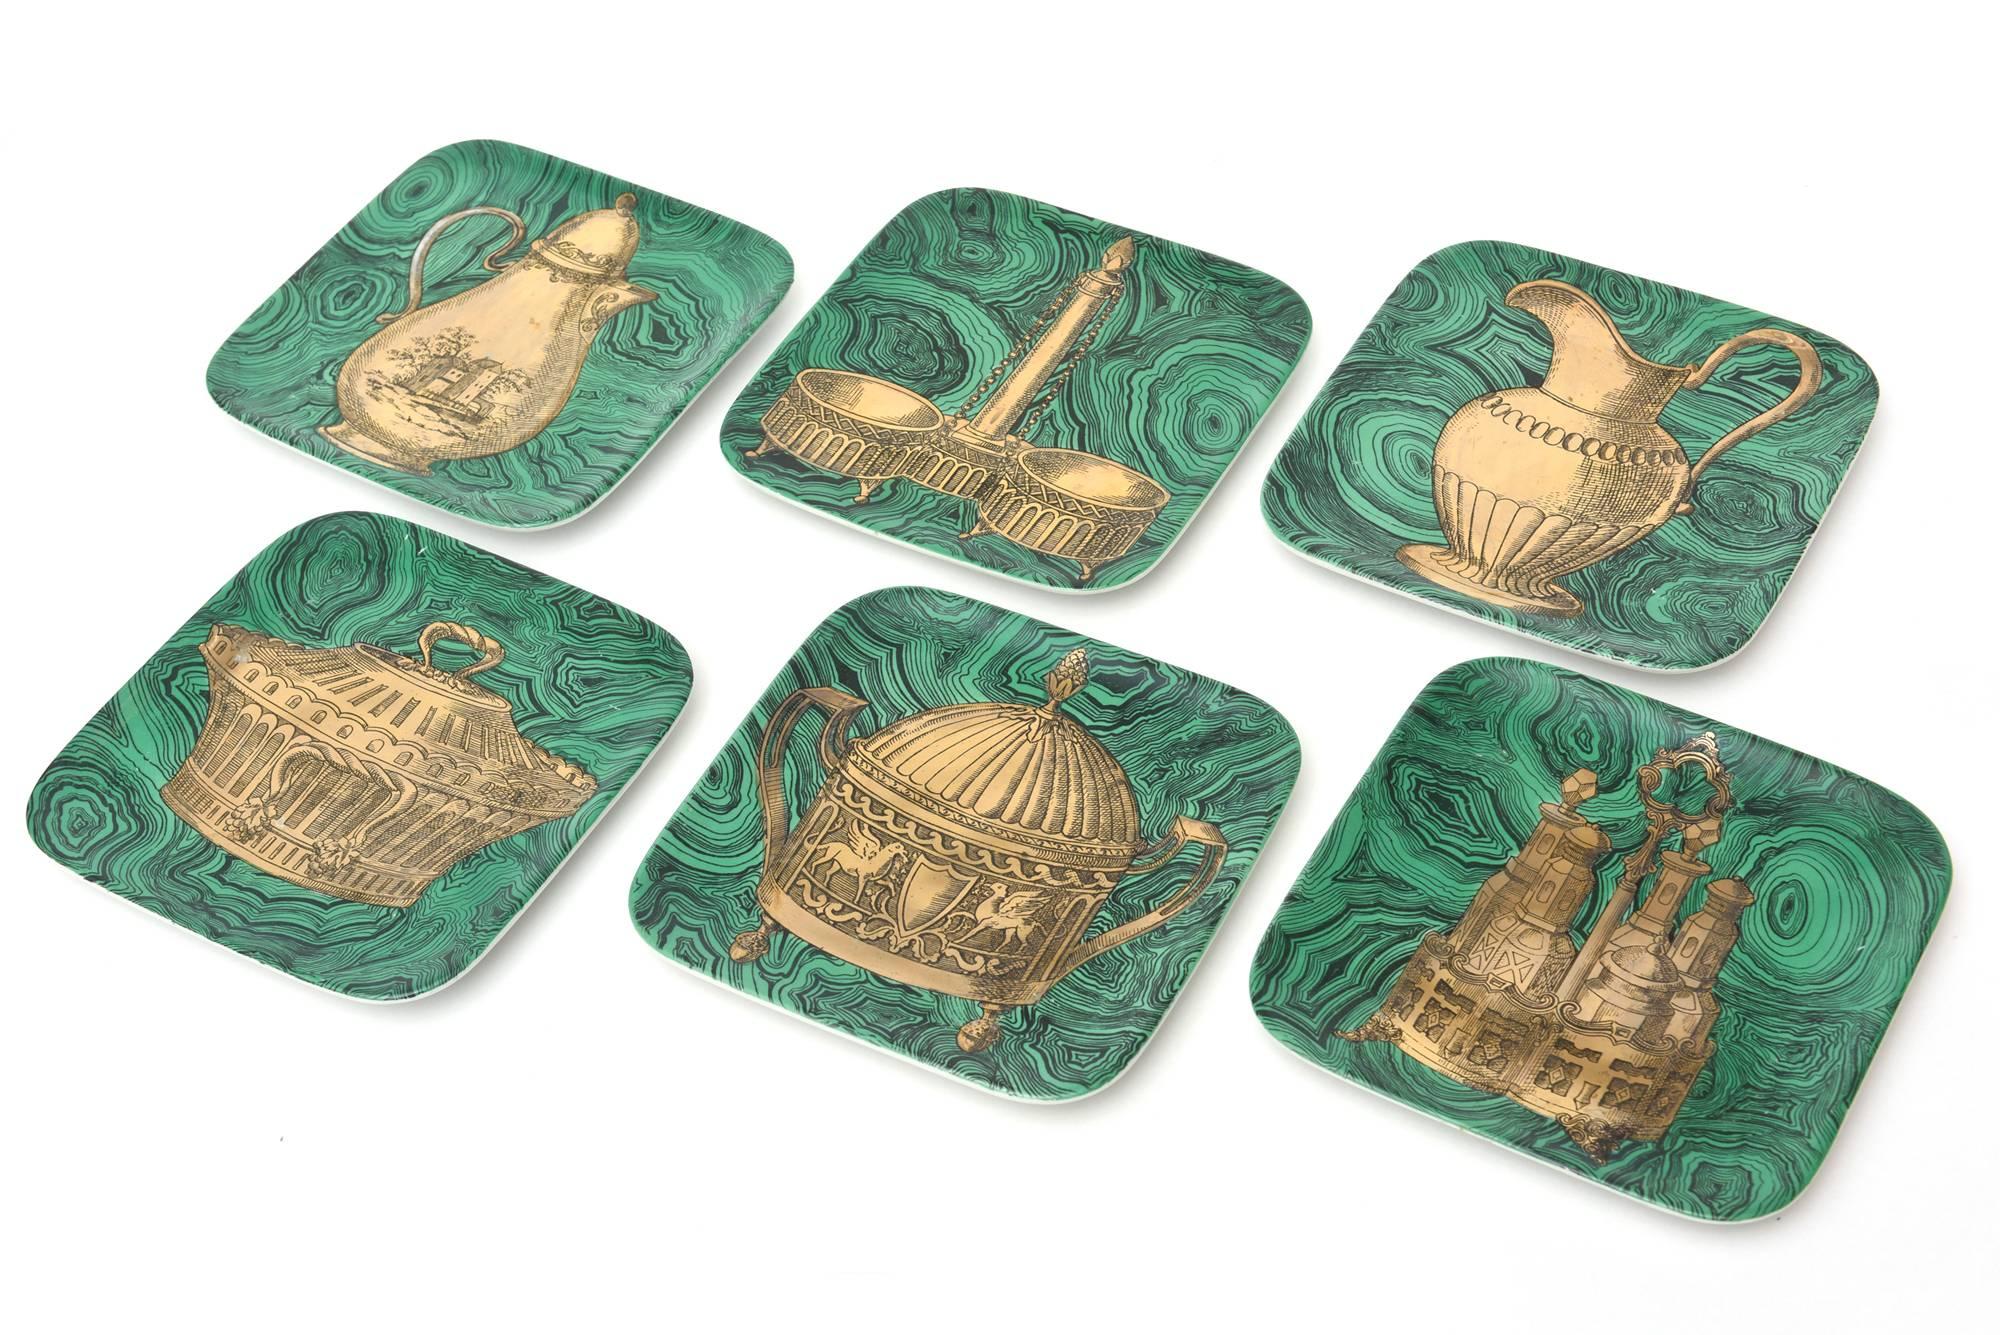 Set of six  fabulous Fornasetti malachite designed porcelain with gilded forms of tabletop serving pieces. Signed Stovigilie Fornasetti Milano made in Italy 1956. They are square plates or dishes.
These are hard to come by now.
